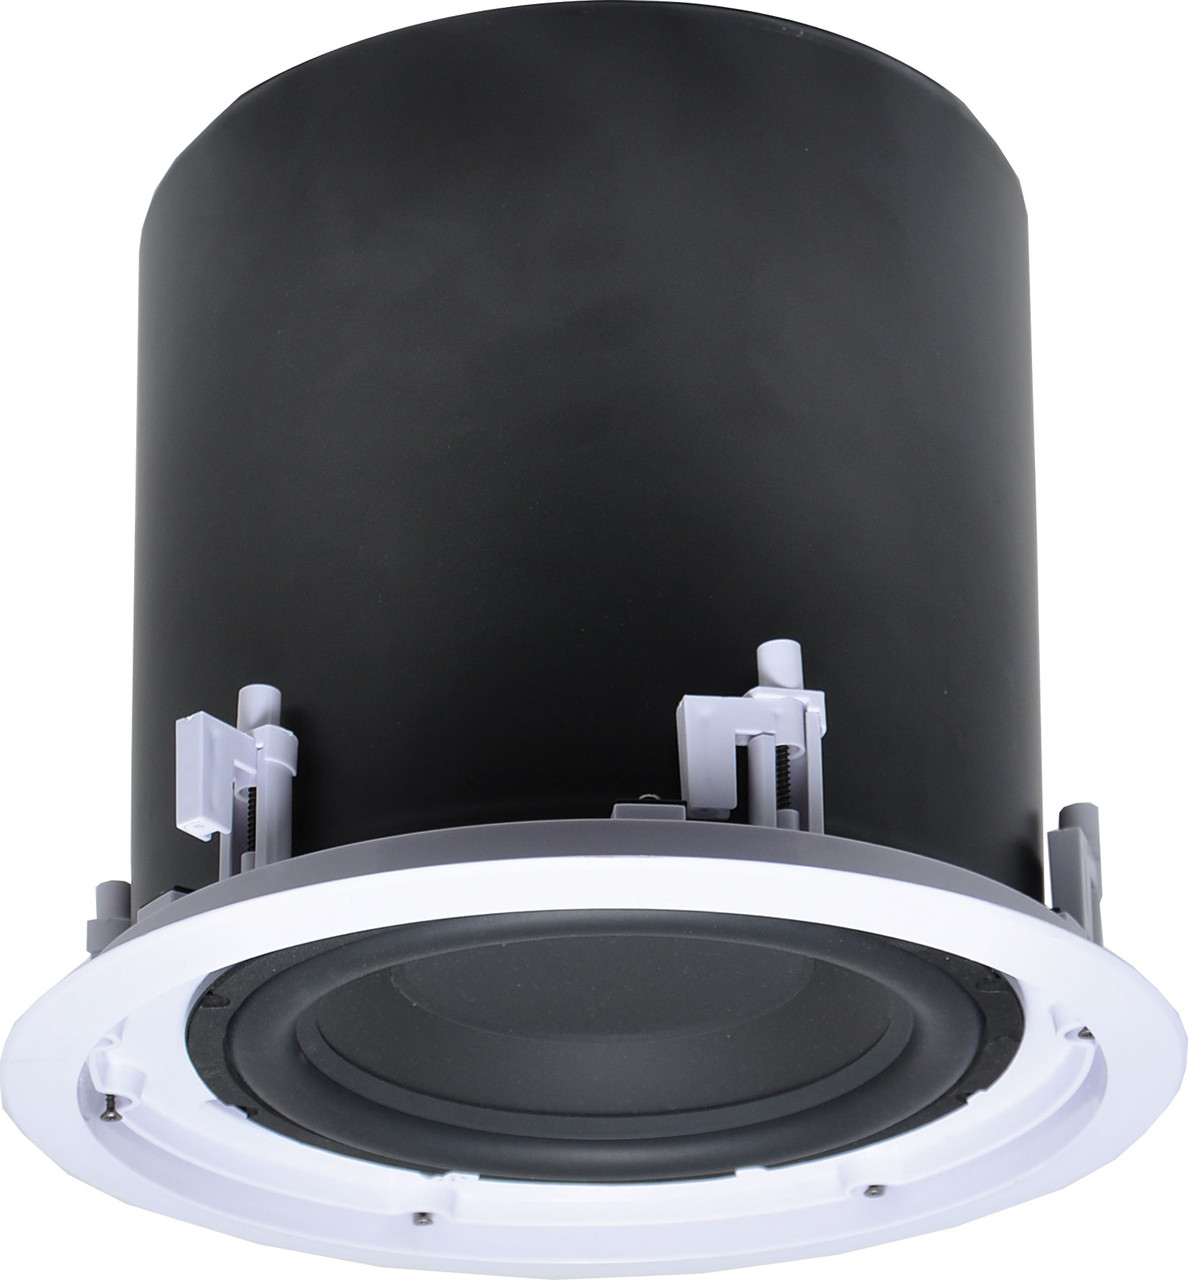 Redback 10" 240W 4 ohm/100V In-Ceiling PA Subwoofer